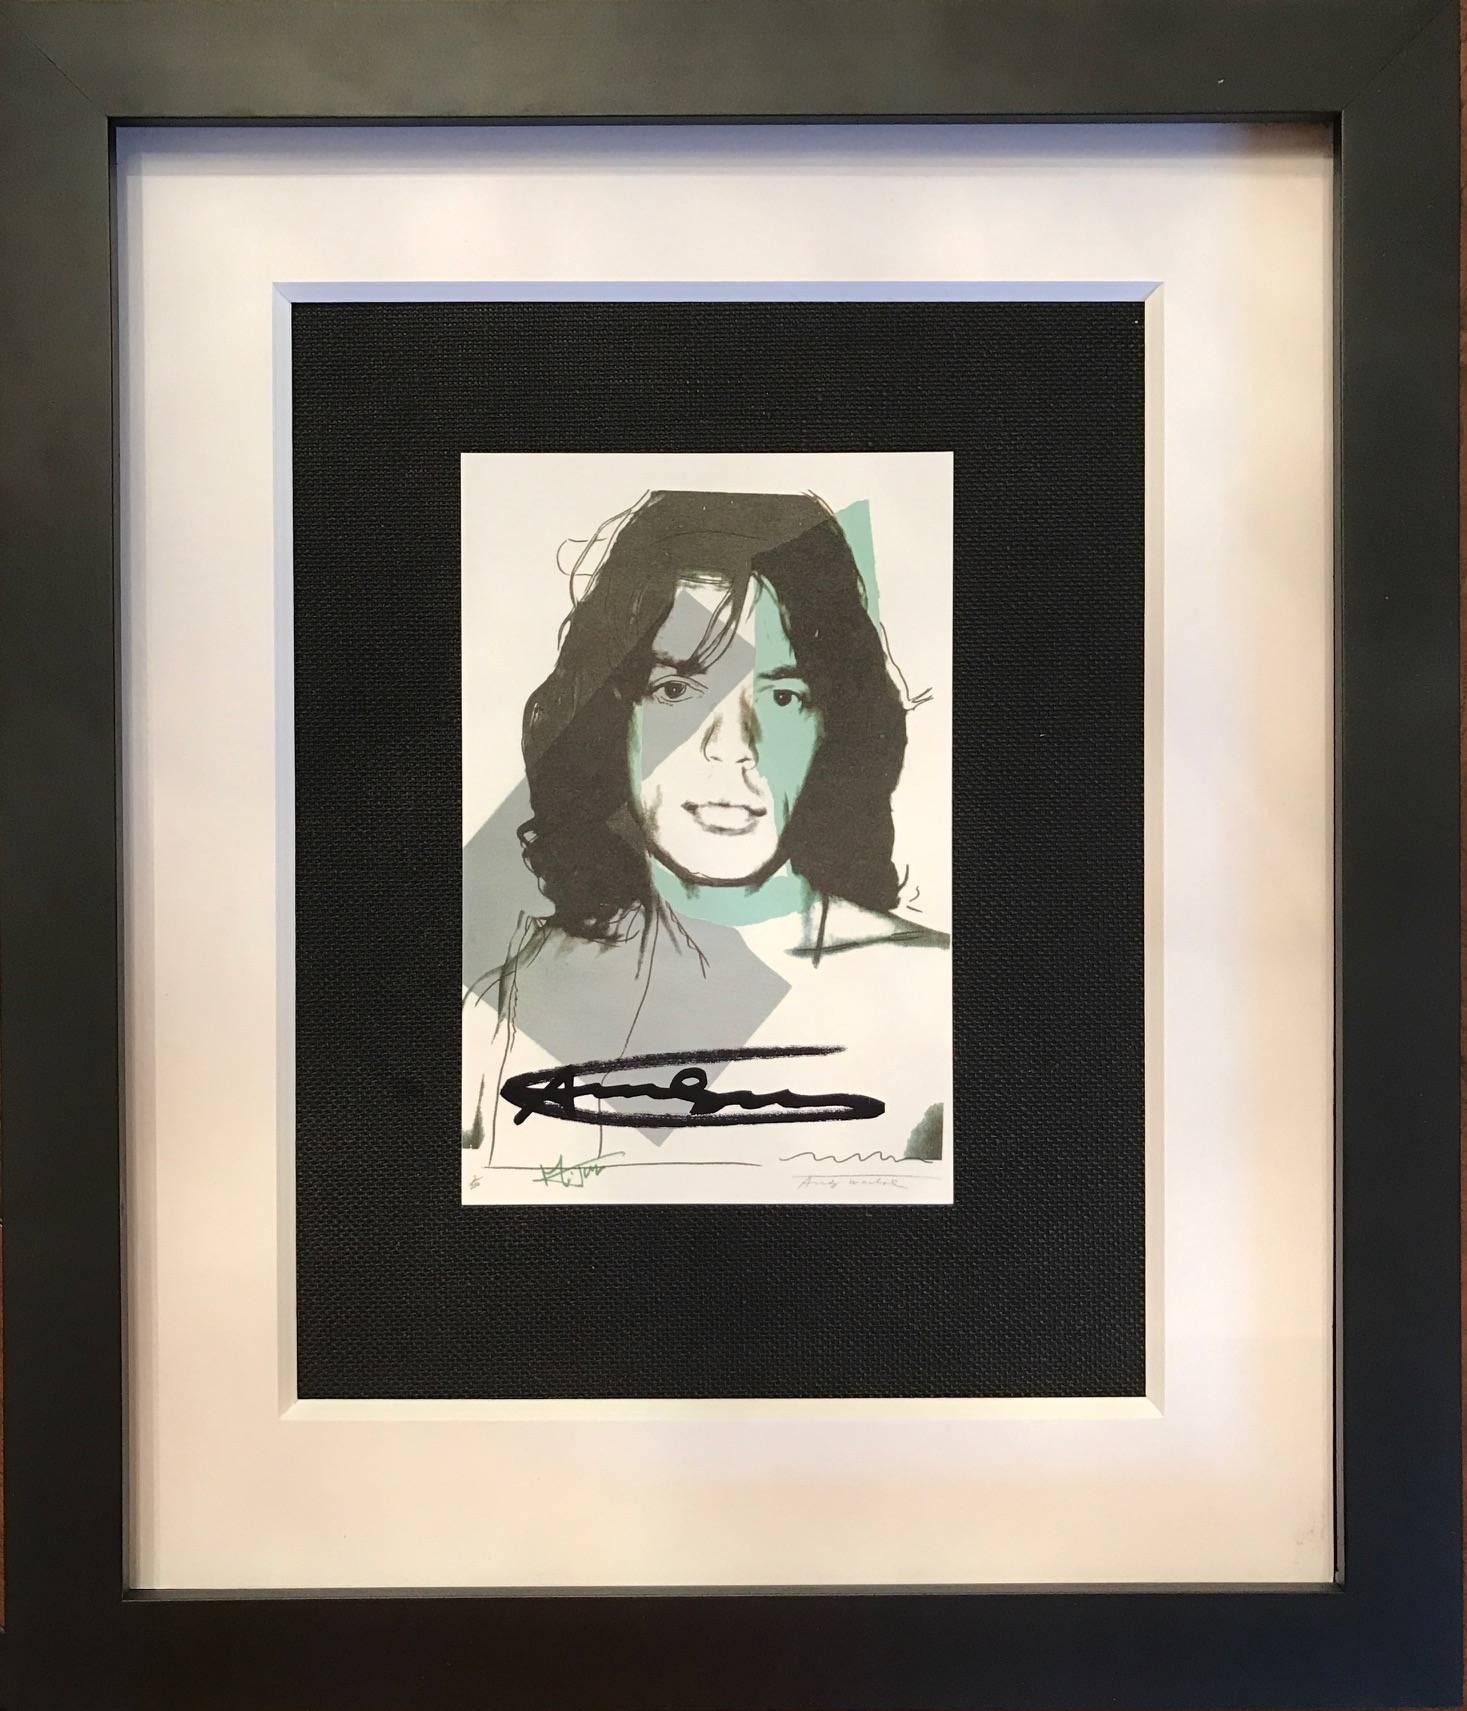 Mick Jagger announcement  - Print by (after) Andy Warhol